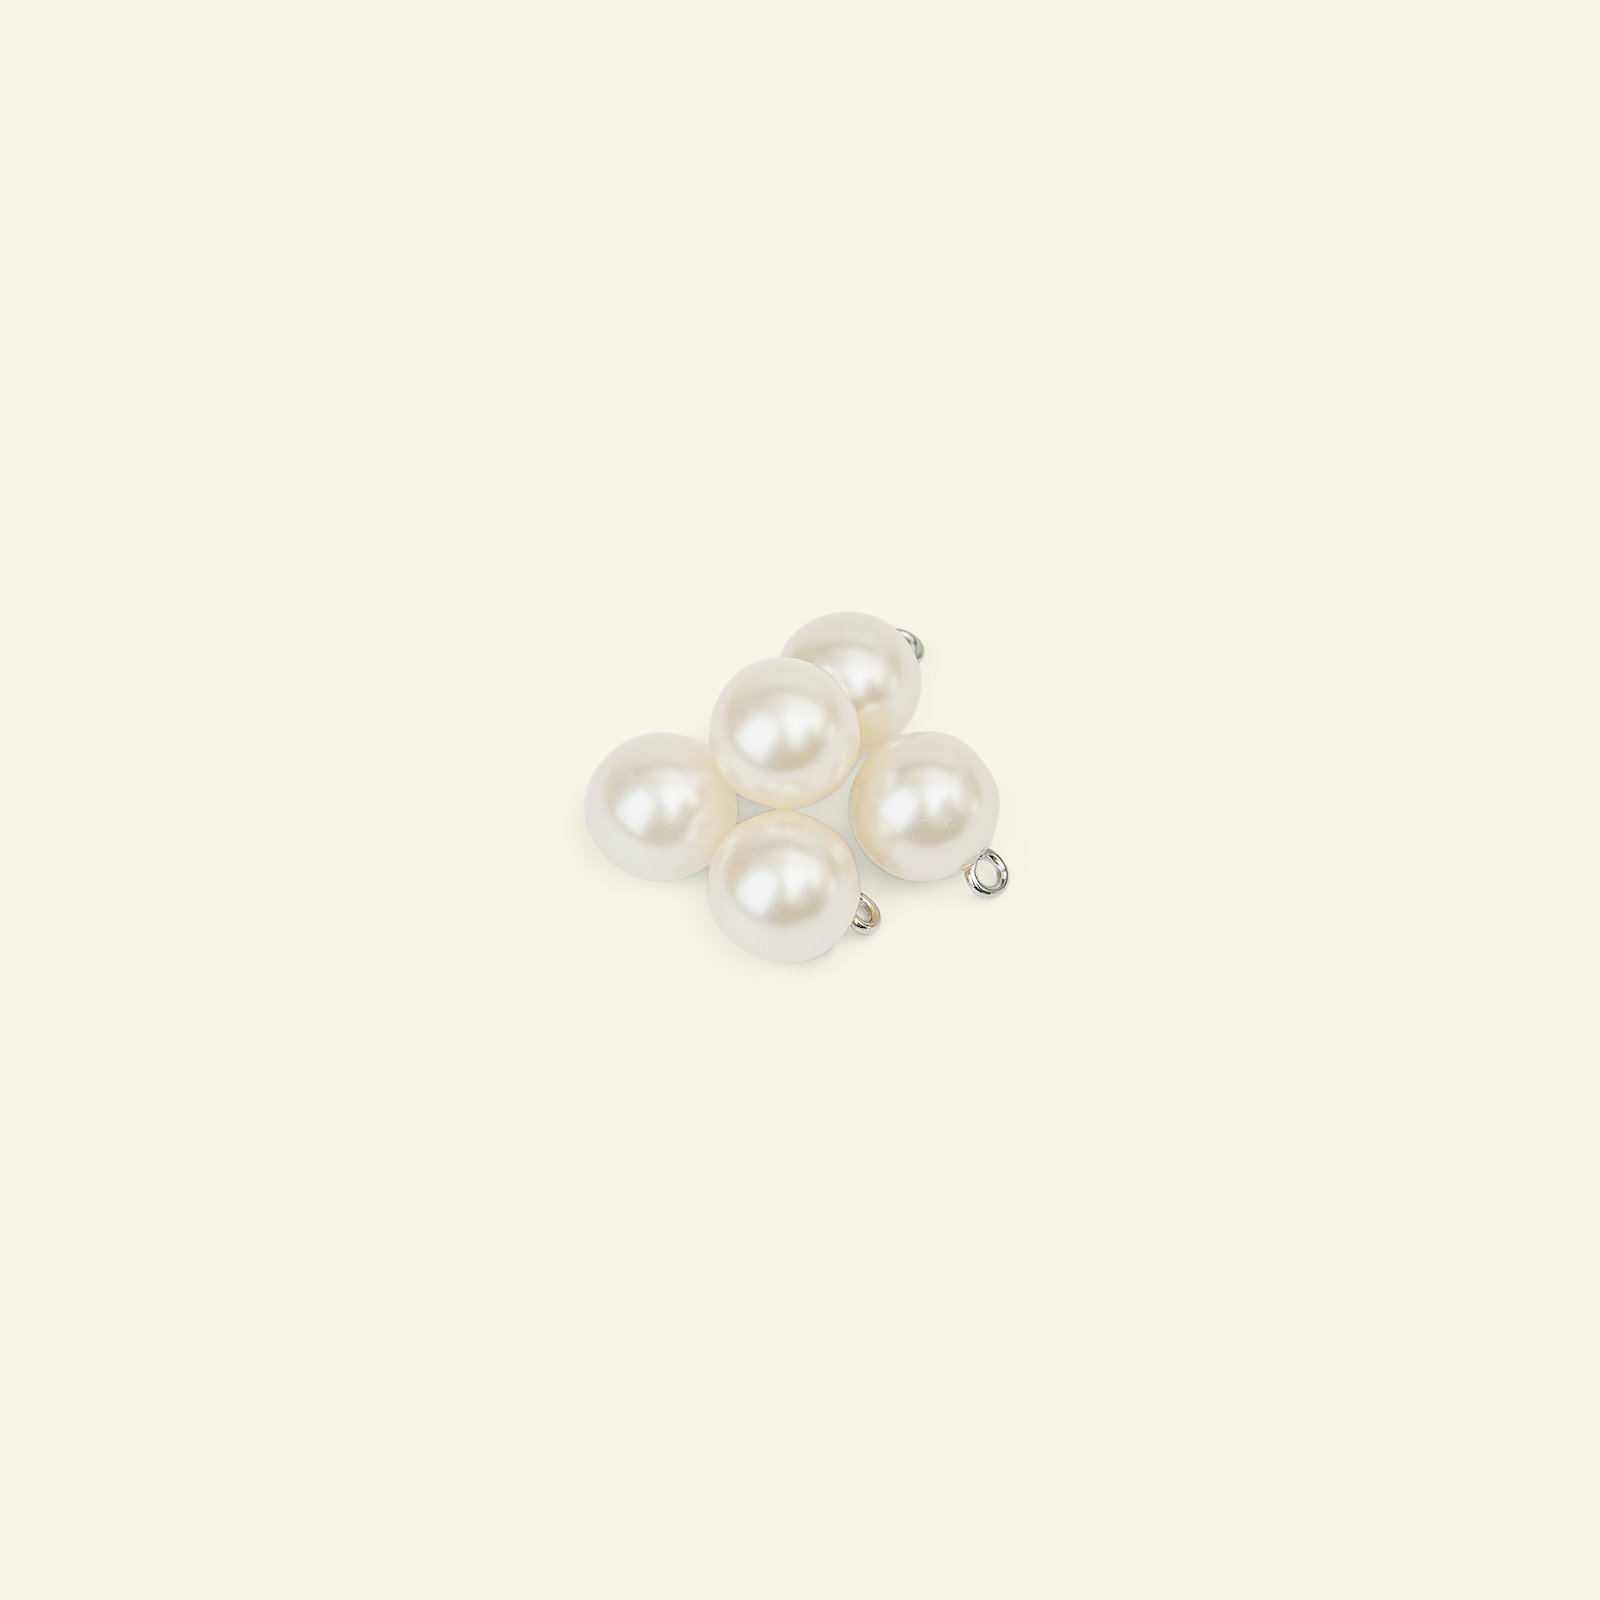 Shank button pearl 11mm white 5pcs 33080_pack